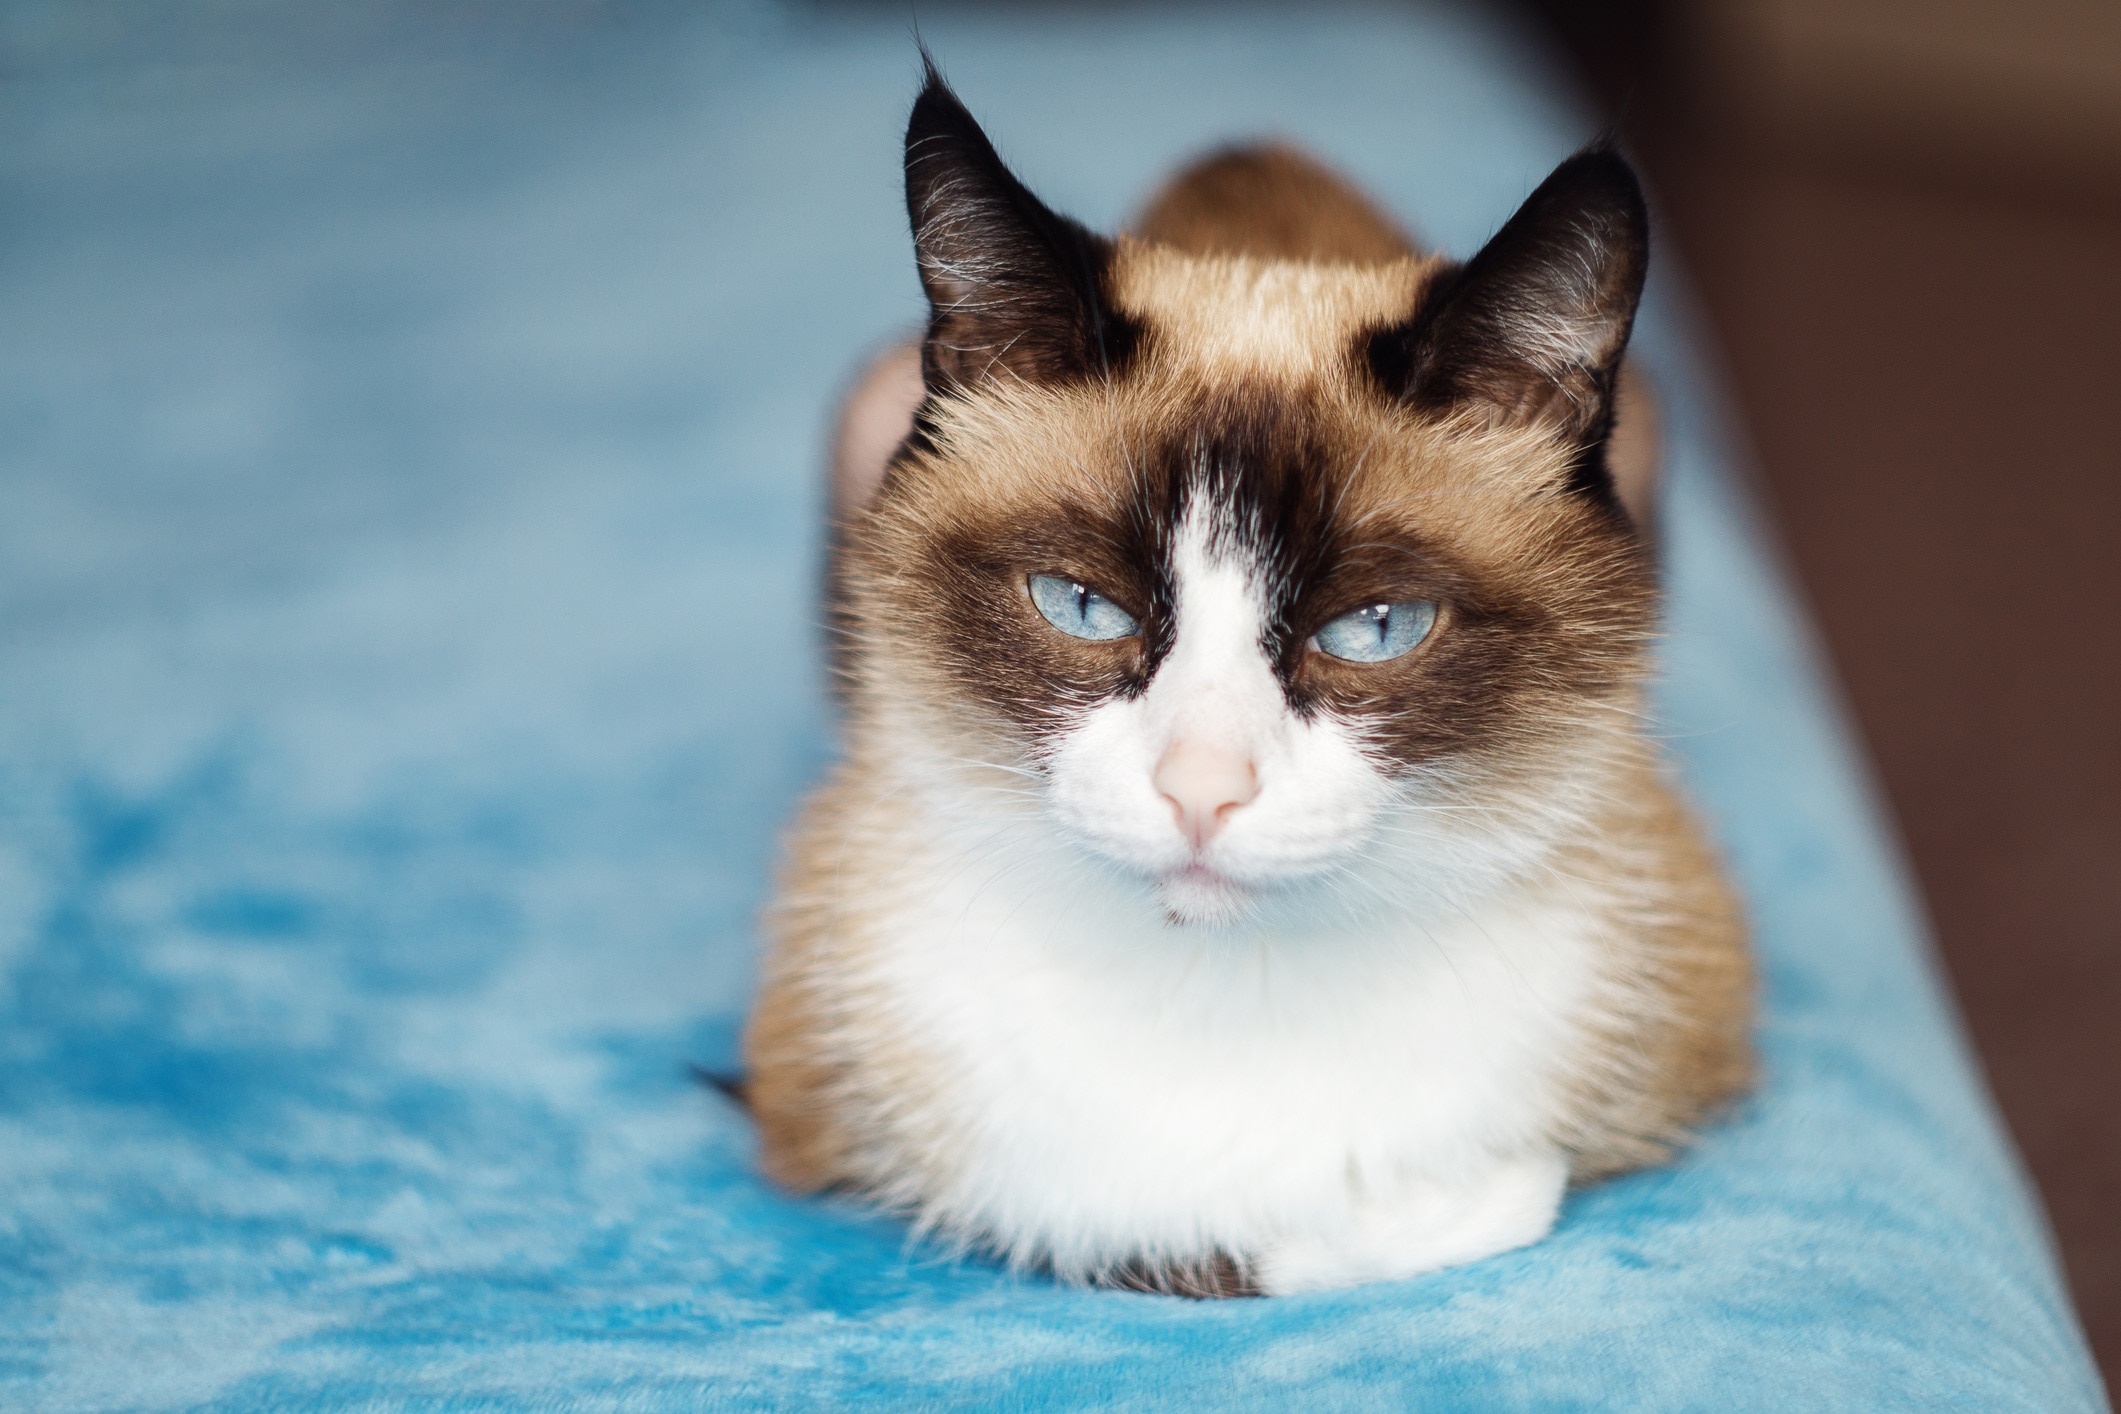 snowshoe cat loafing on a bed